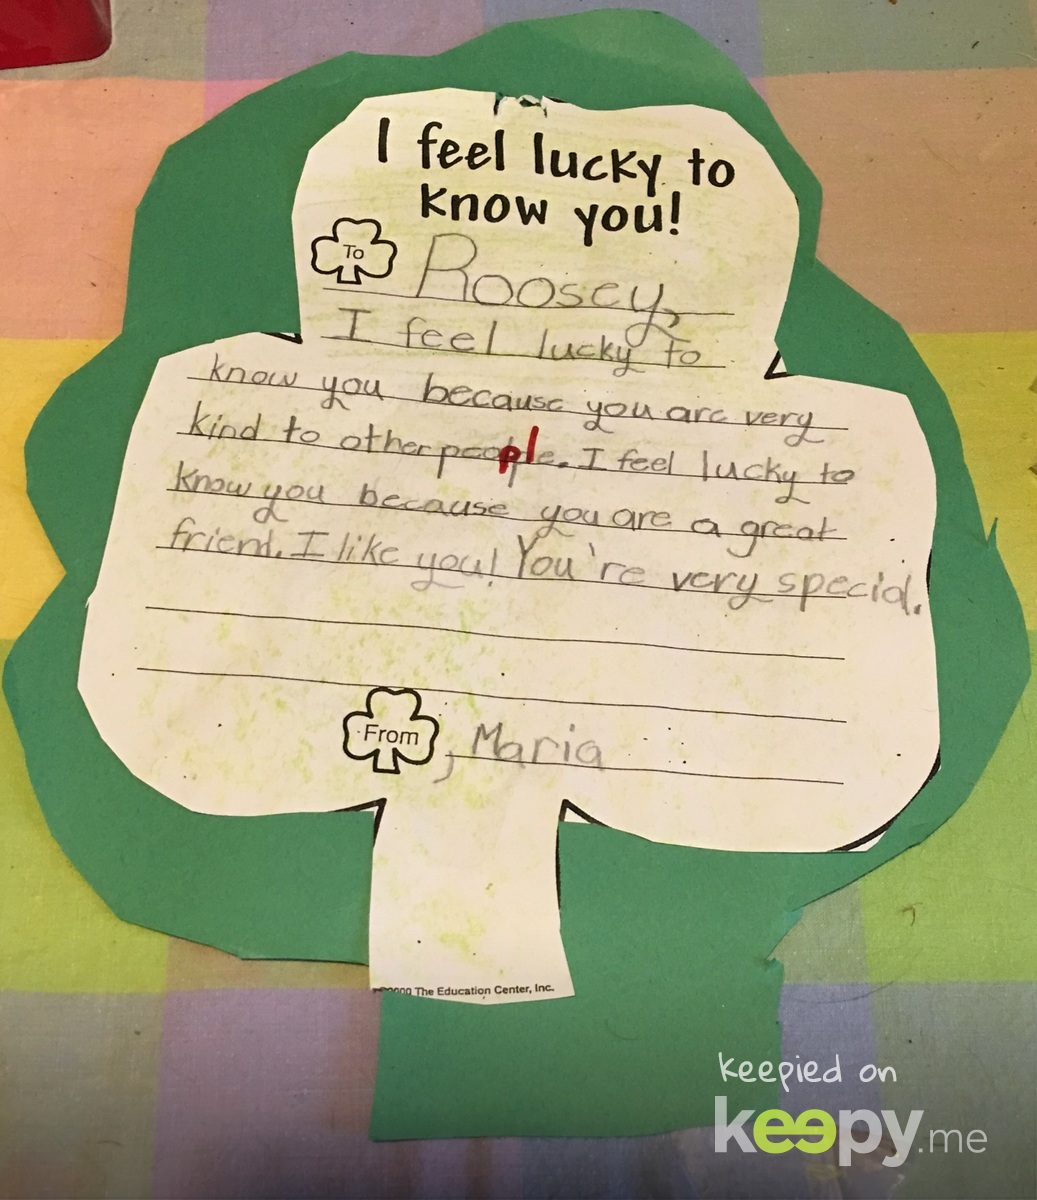 Maria’s St. Patrick’s Day note to #RoslynJ » Keepy.me